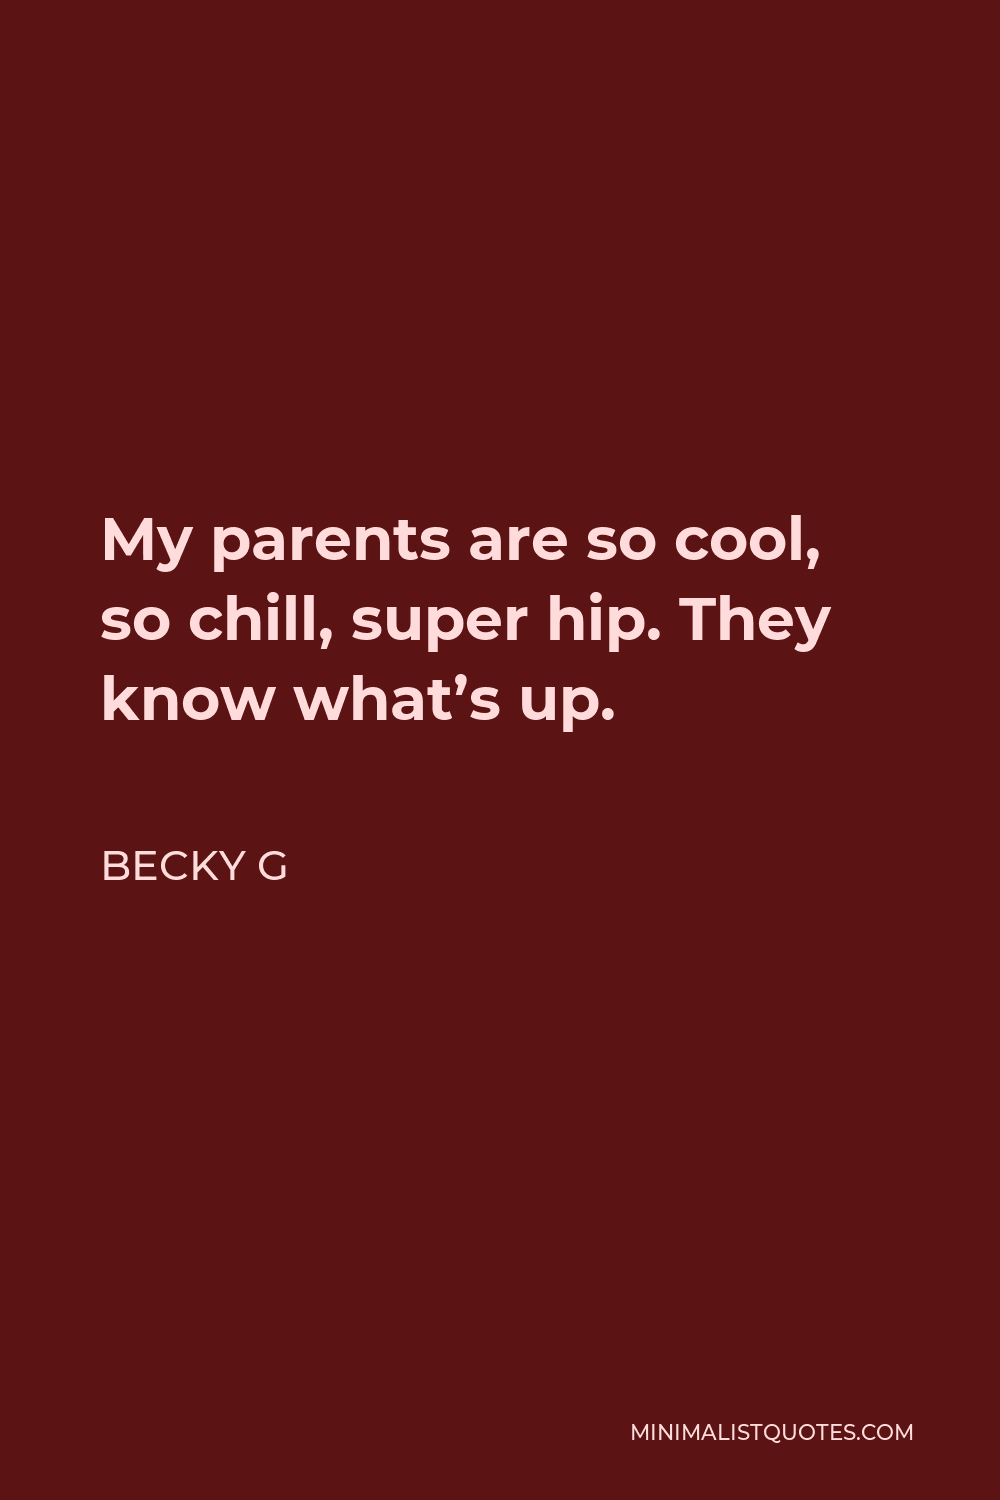 Becky G Quote - My parents are so cool, so chill, super hip. They know what’s up.